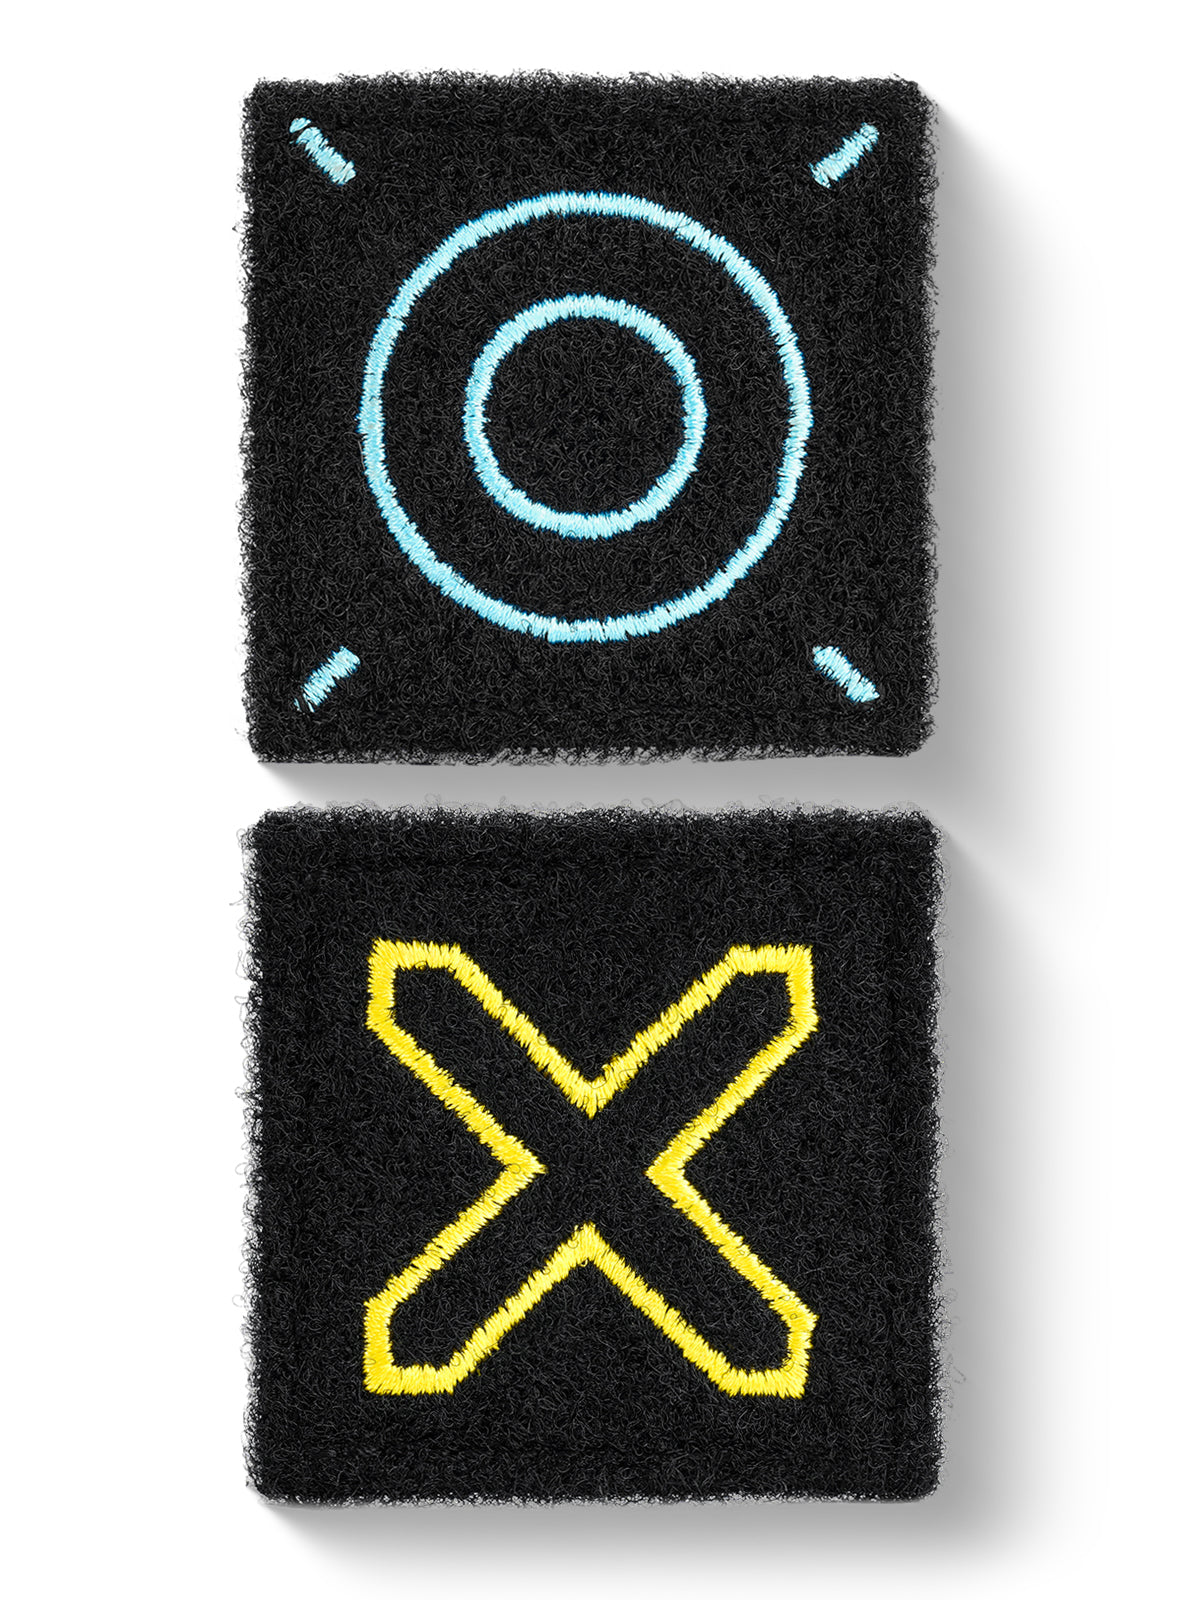 BG11 Removable Magnetic Loop Patches